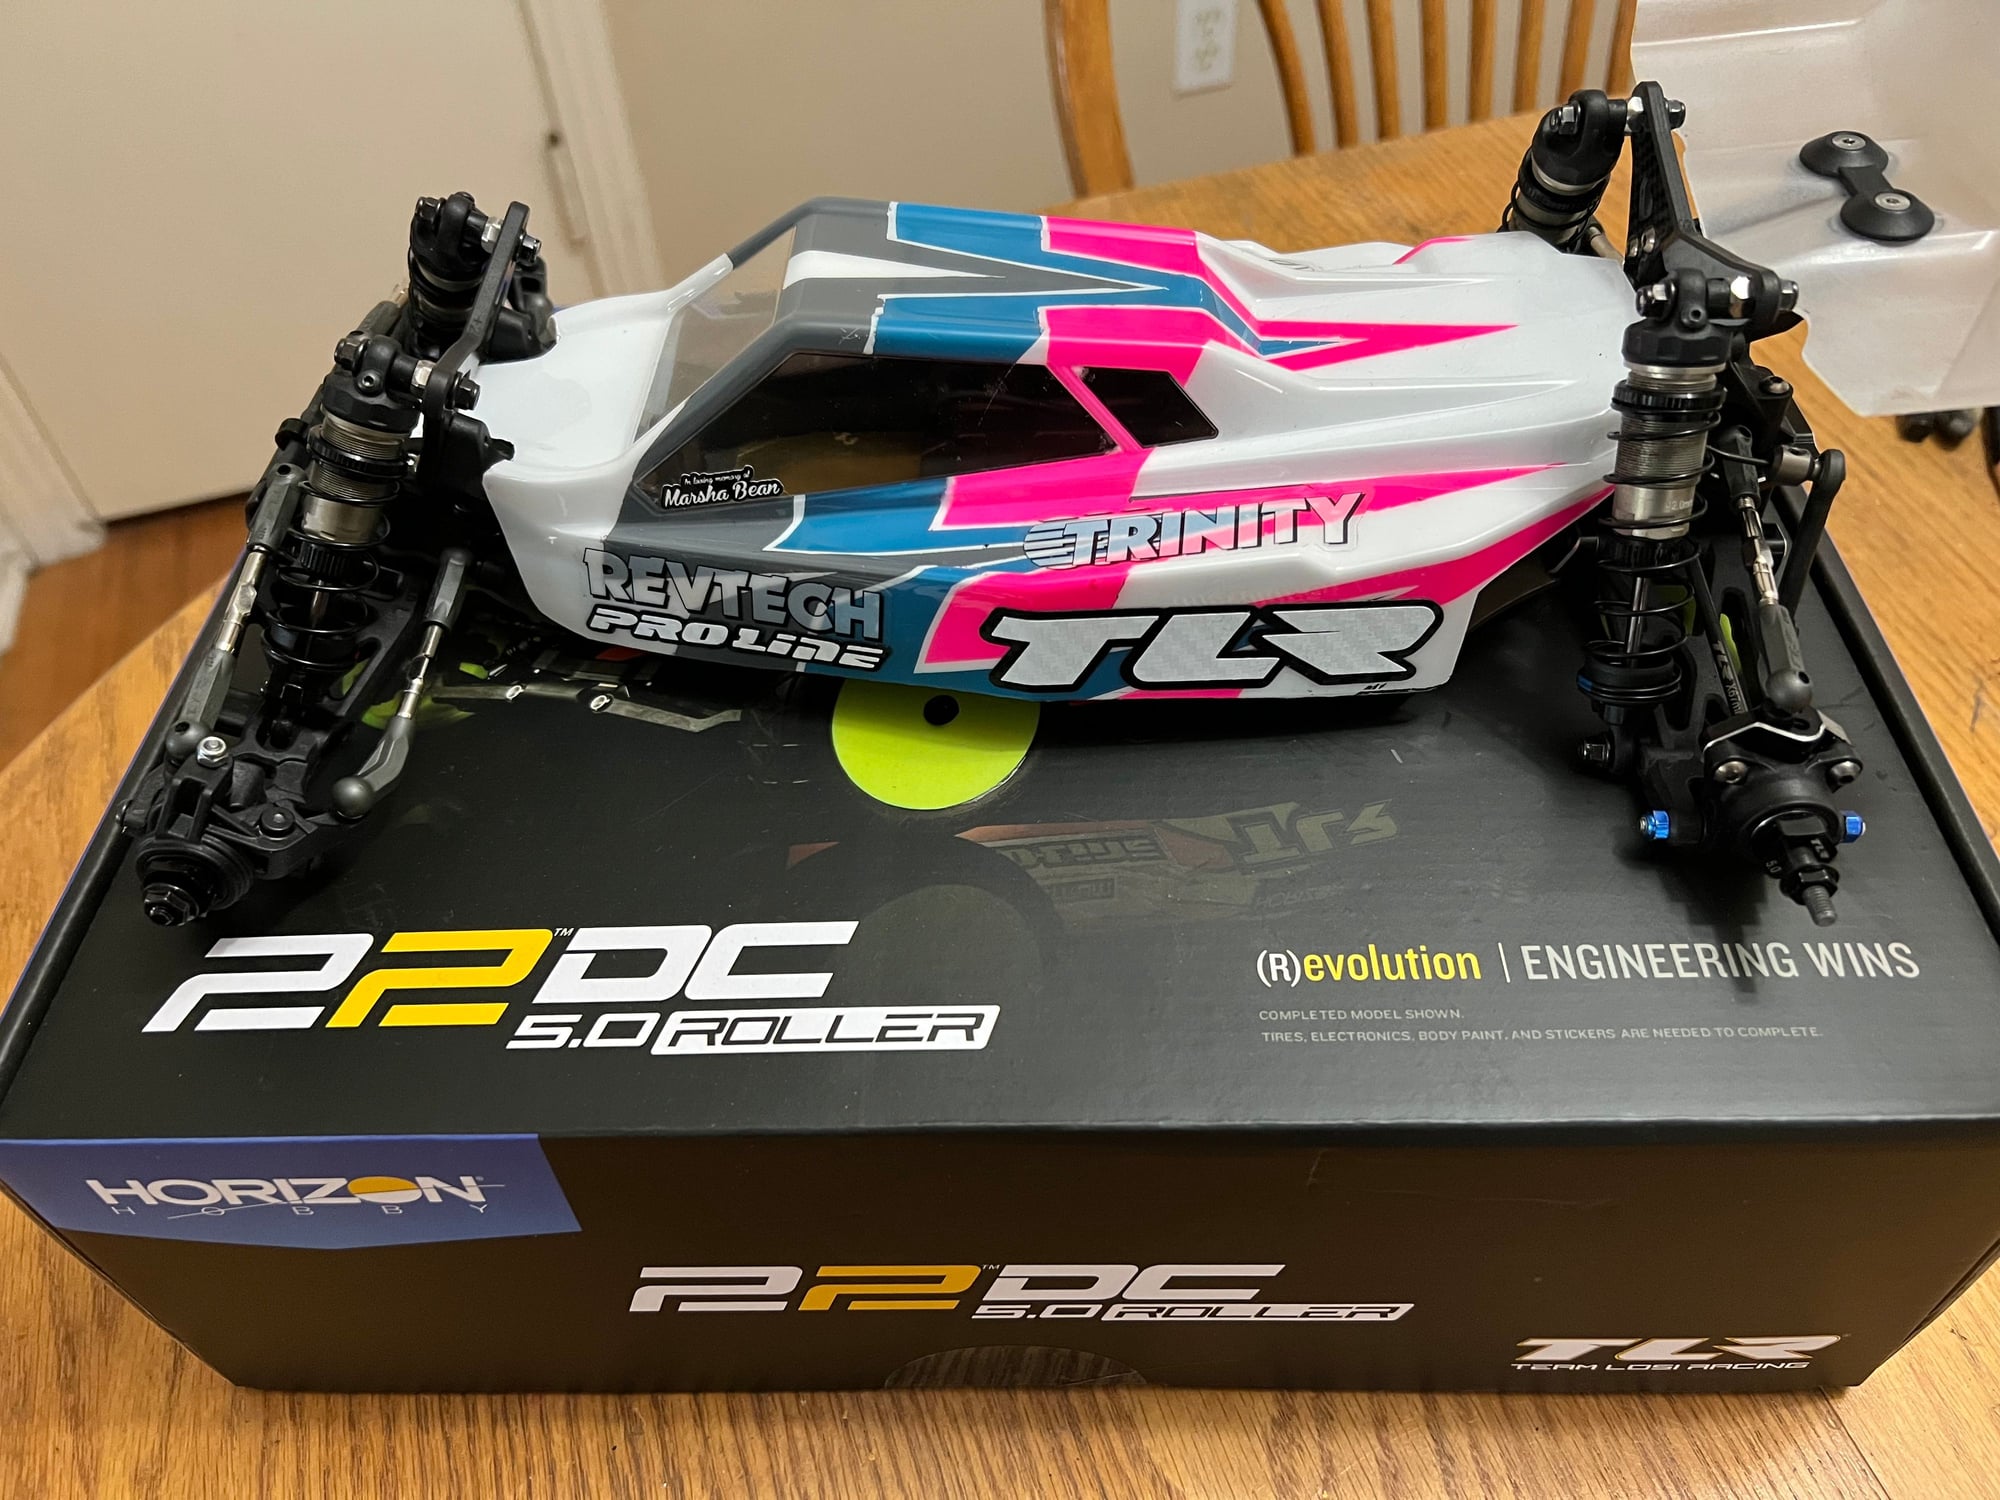 R/C Tech Forums - FS: TLR 22 5.0 DC roller. With upgrades